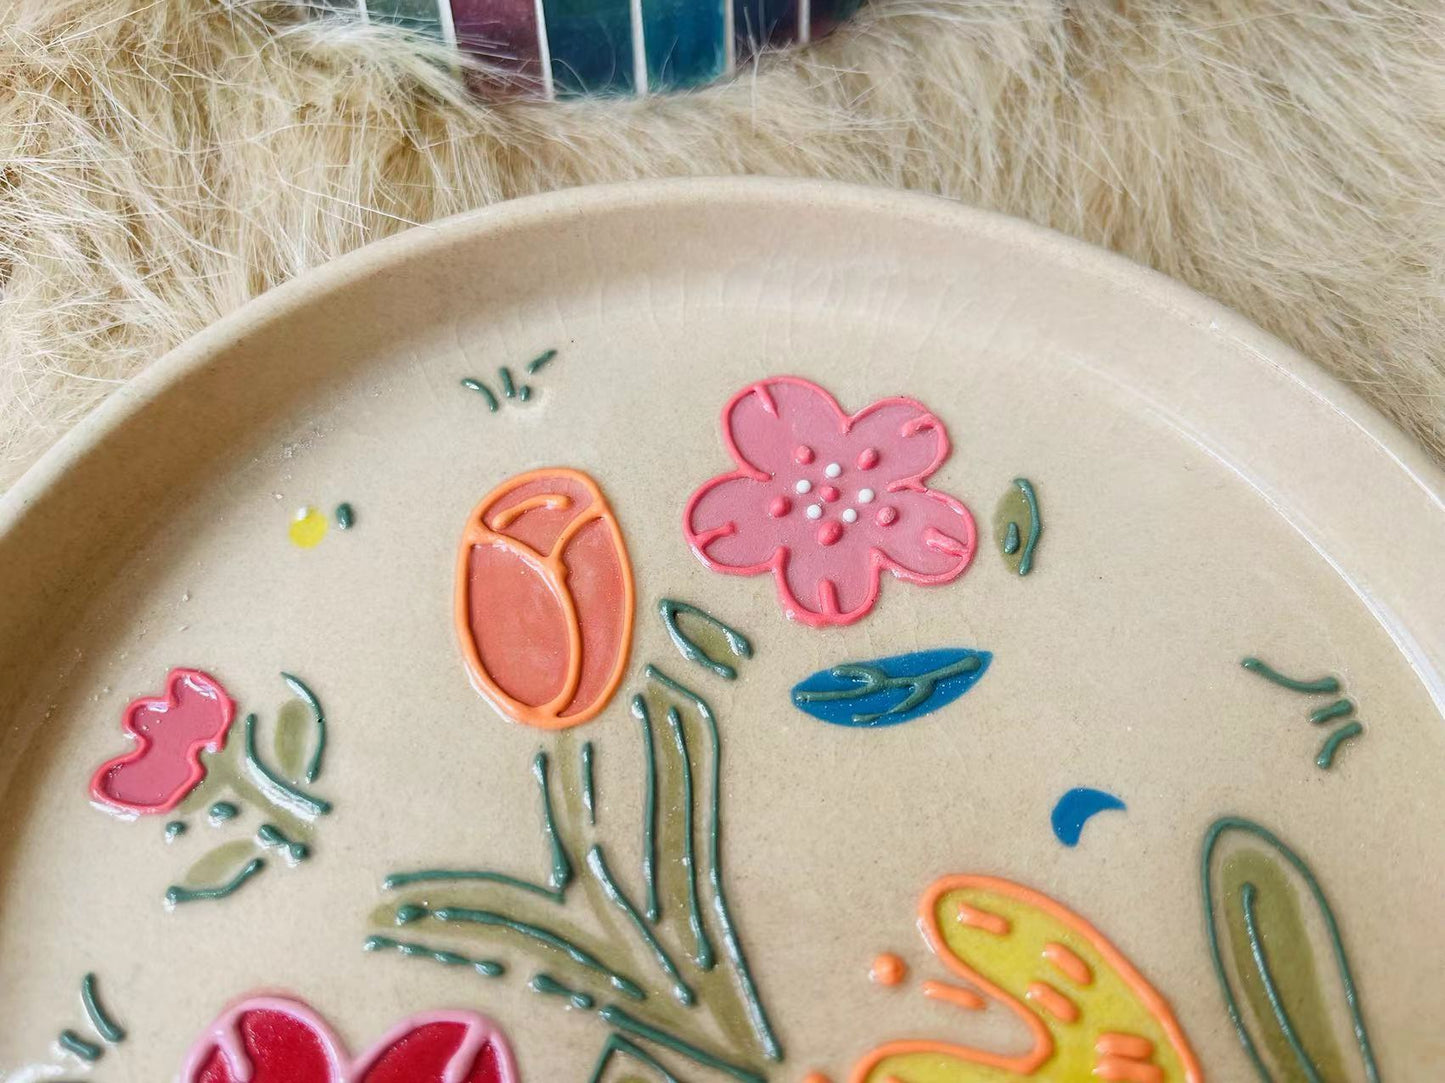 Hand-painted Floral Ceramic Plate, Personalized Handmade Cute Pottery Dinnerware for Gifts